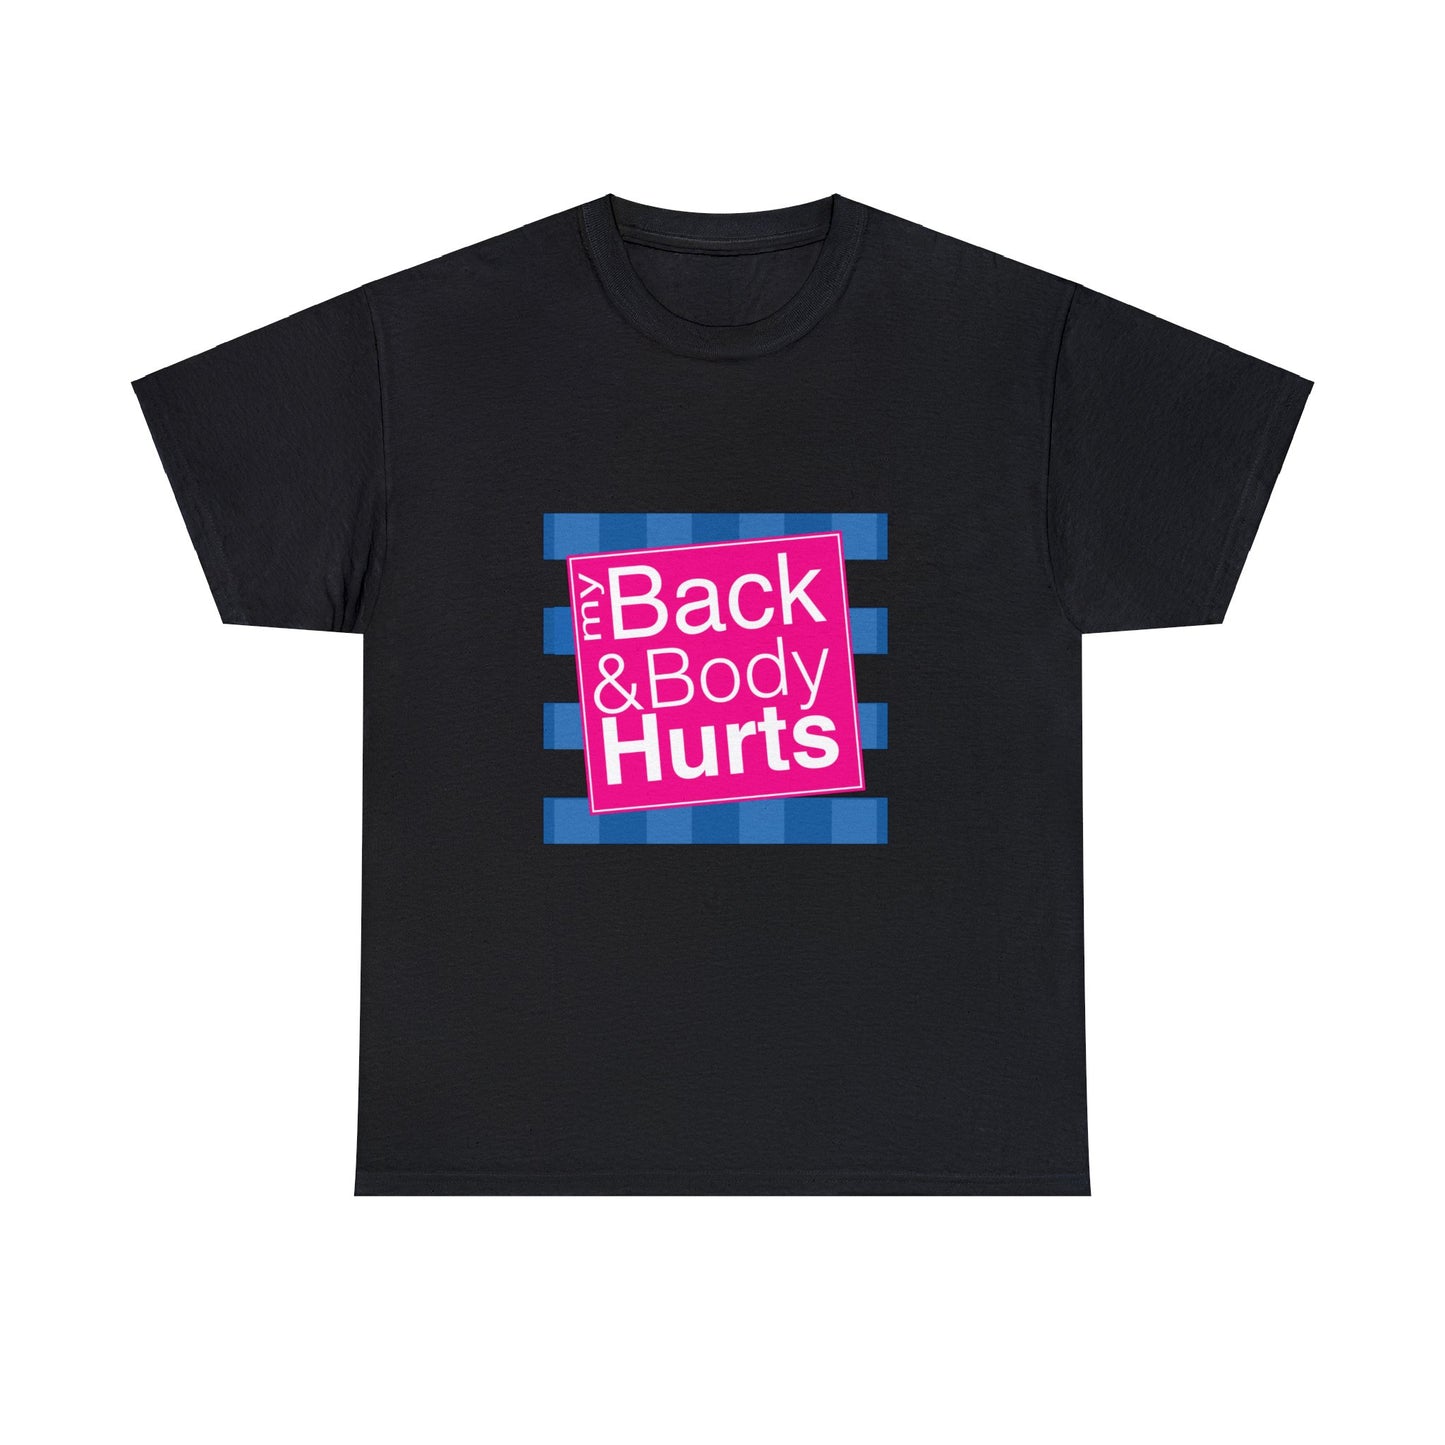 My Back and Body Hurts T-Shirt